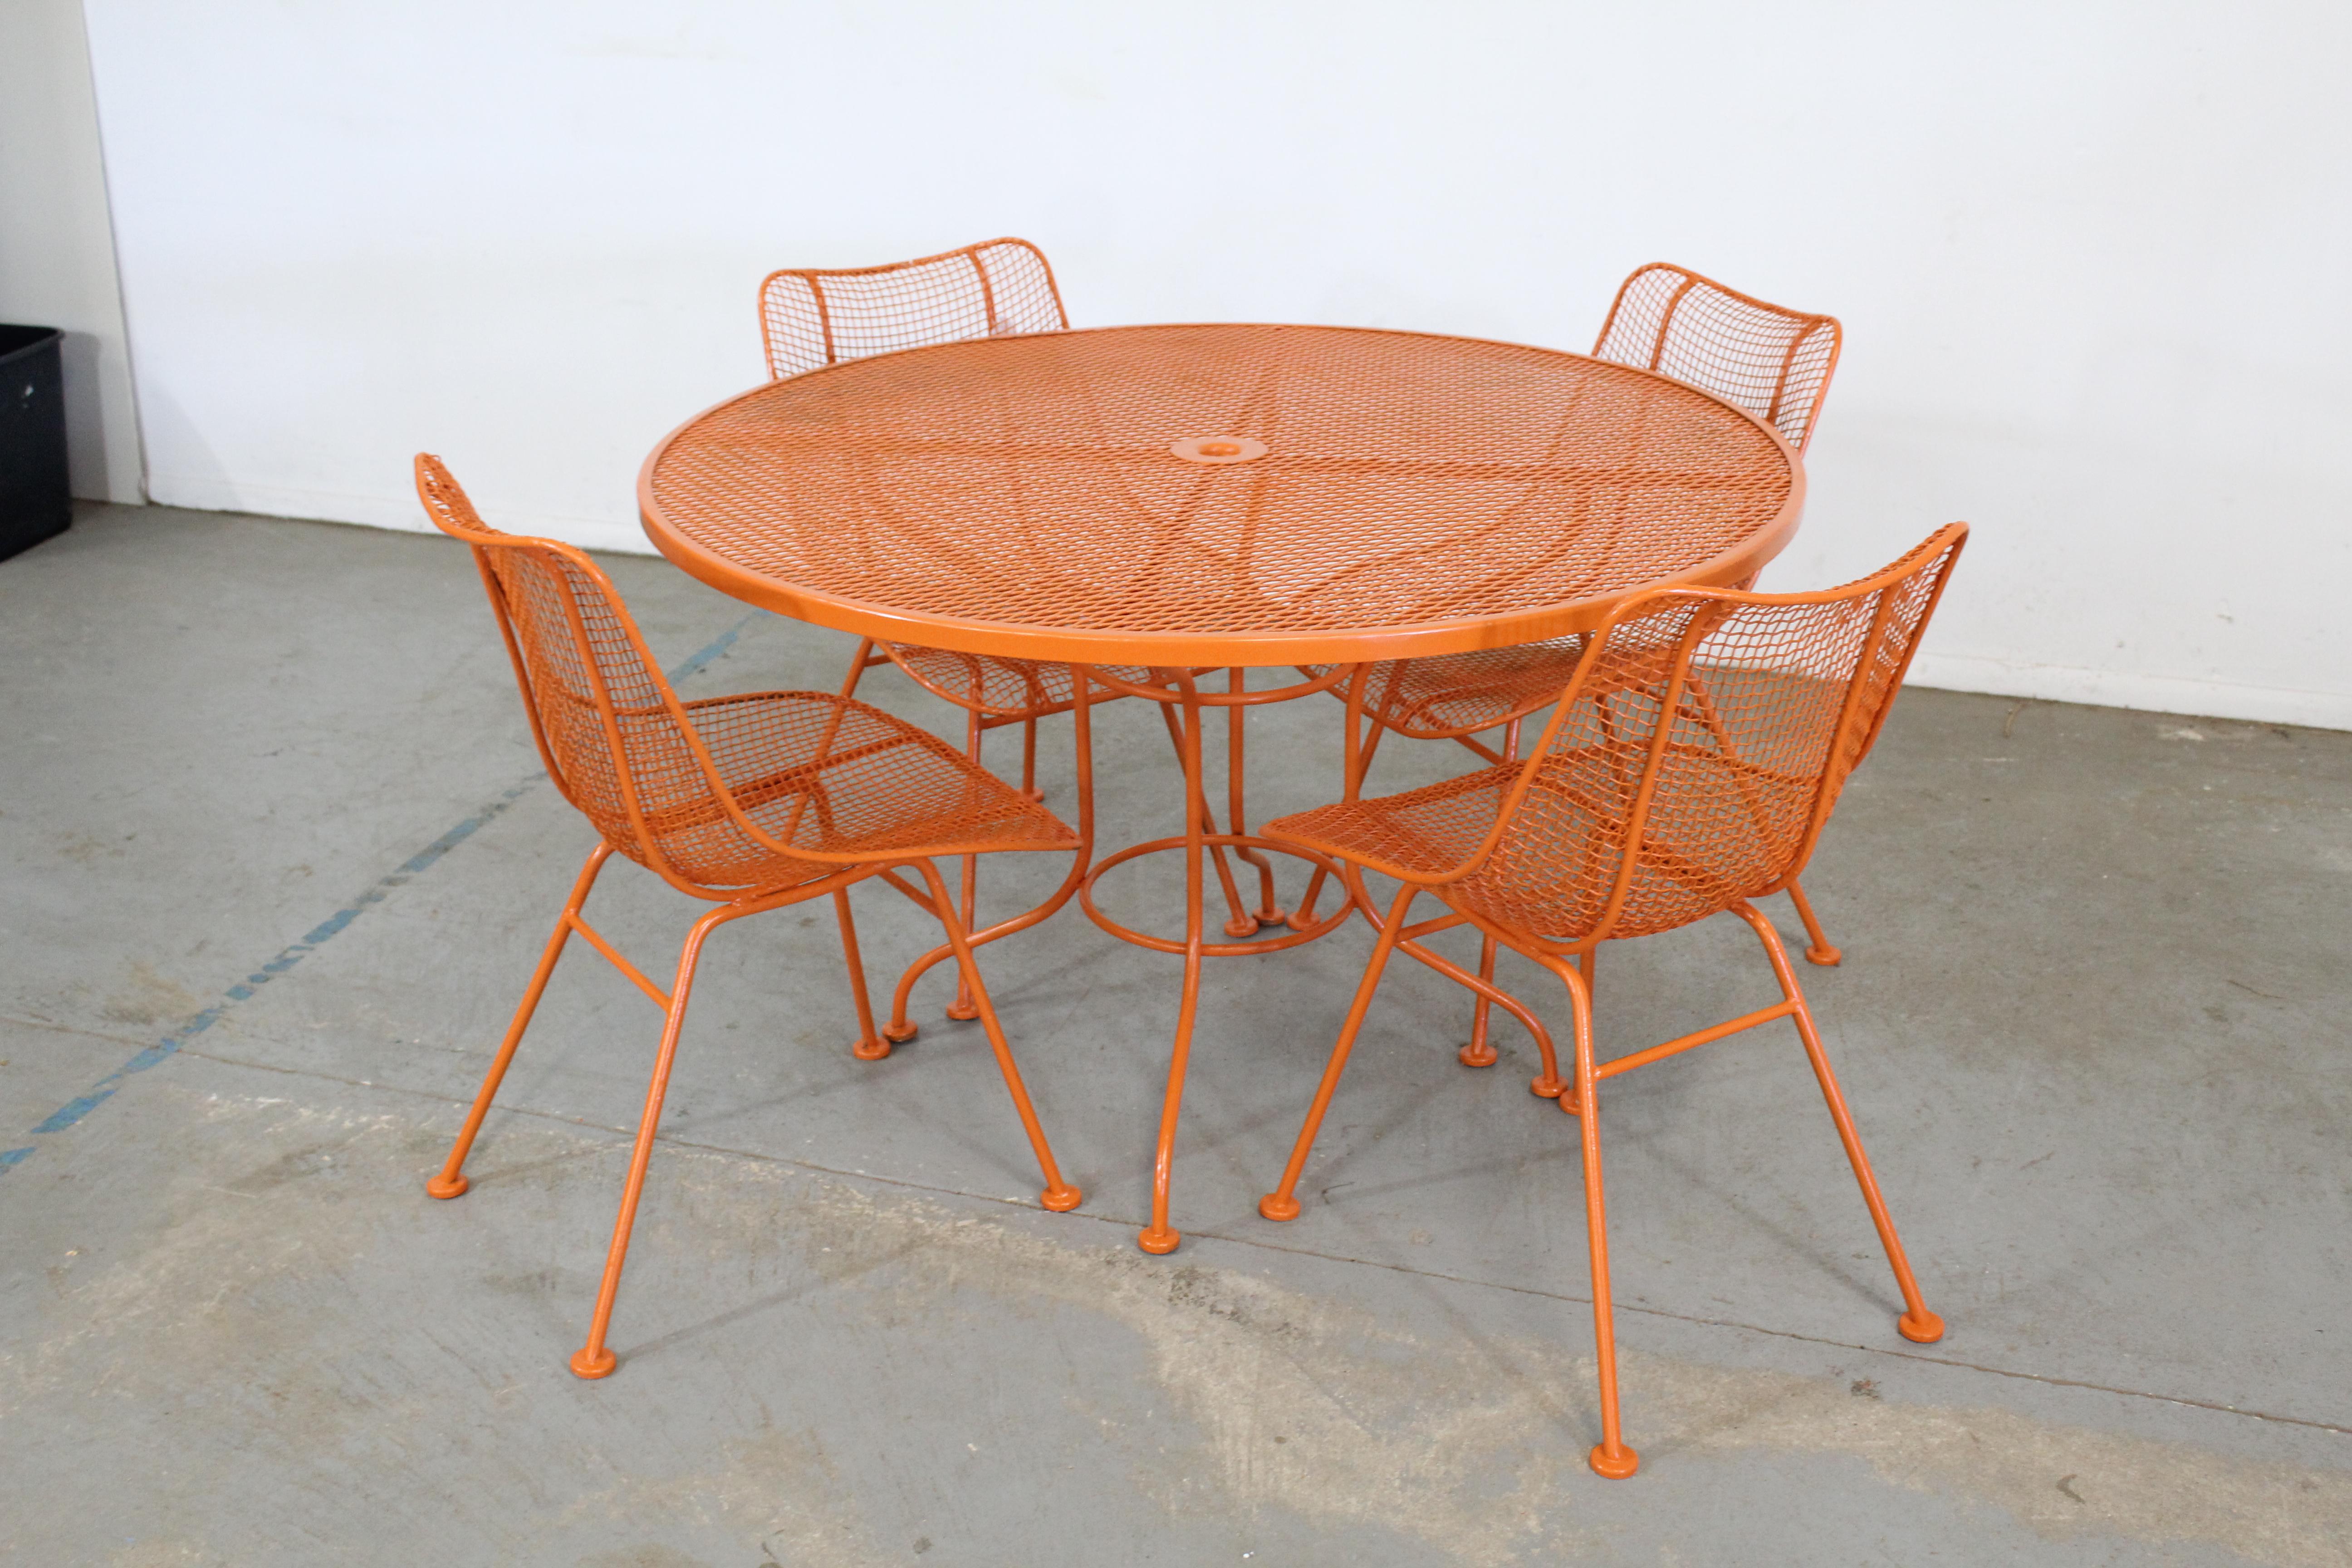 Offered is a mid century Danish Modern Woodard sculptura table and 4 side chairs designed by John Woodard, circa 1956 for the 'Sculptura' line. Features enameled and woven wrought iron. The chairs are structurally sound in very good condition with